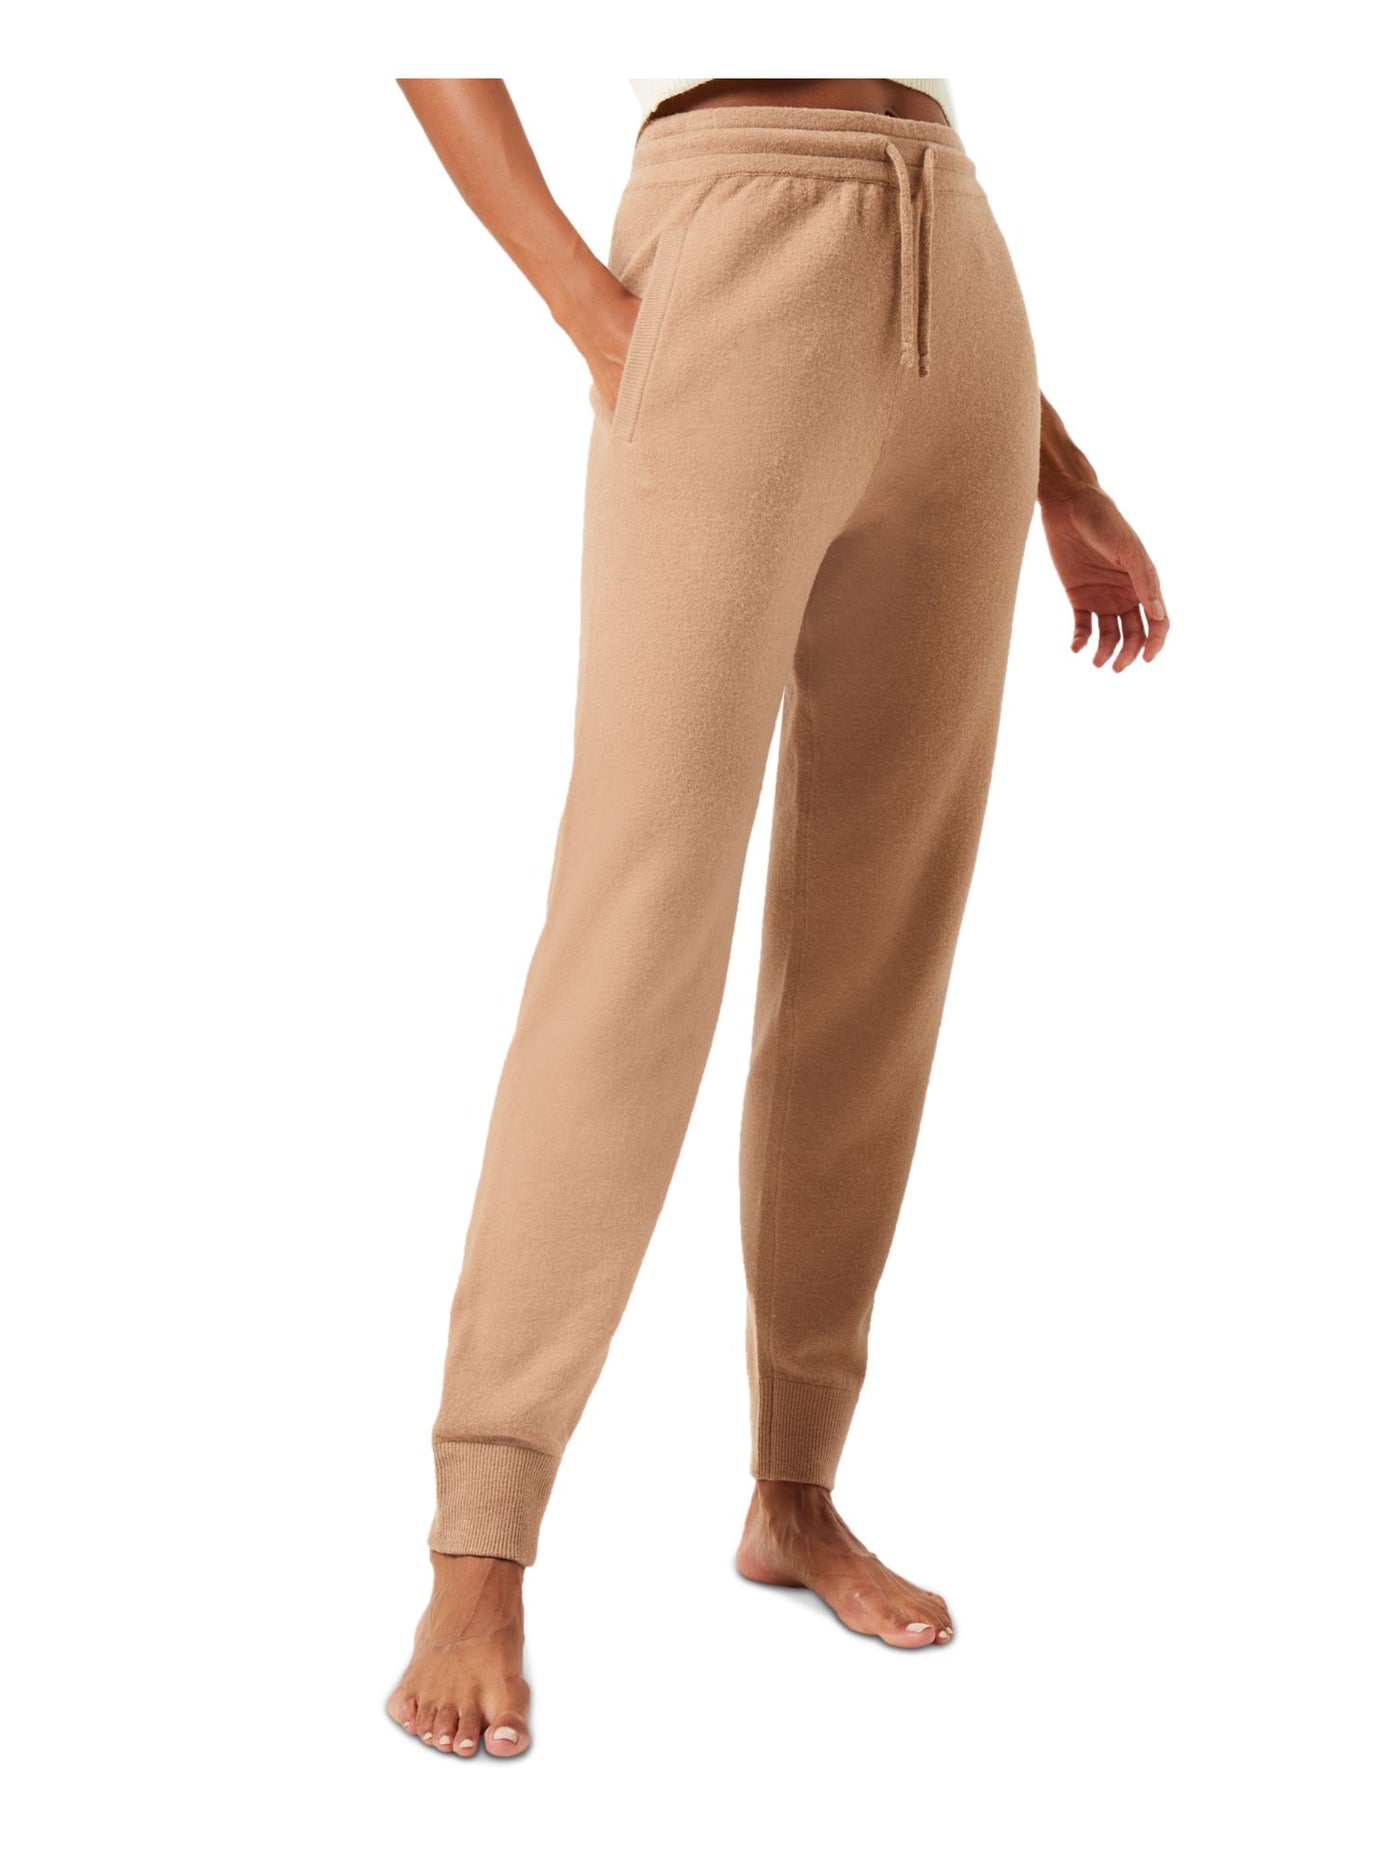 FRENCH CONNECTION Womens Brown Pocketed Tie Banded Hems Rib Trim Lounge Pants M